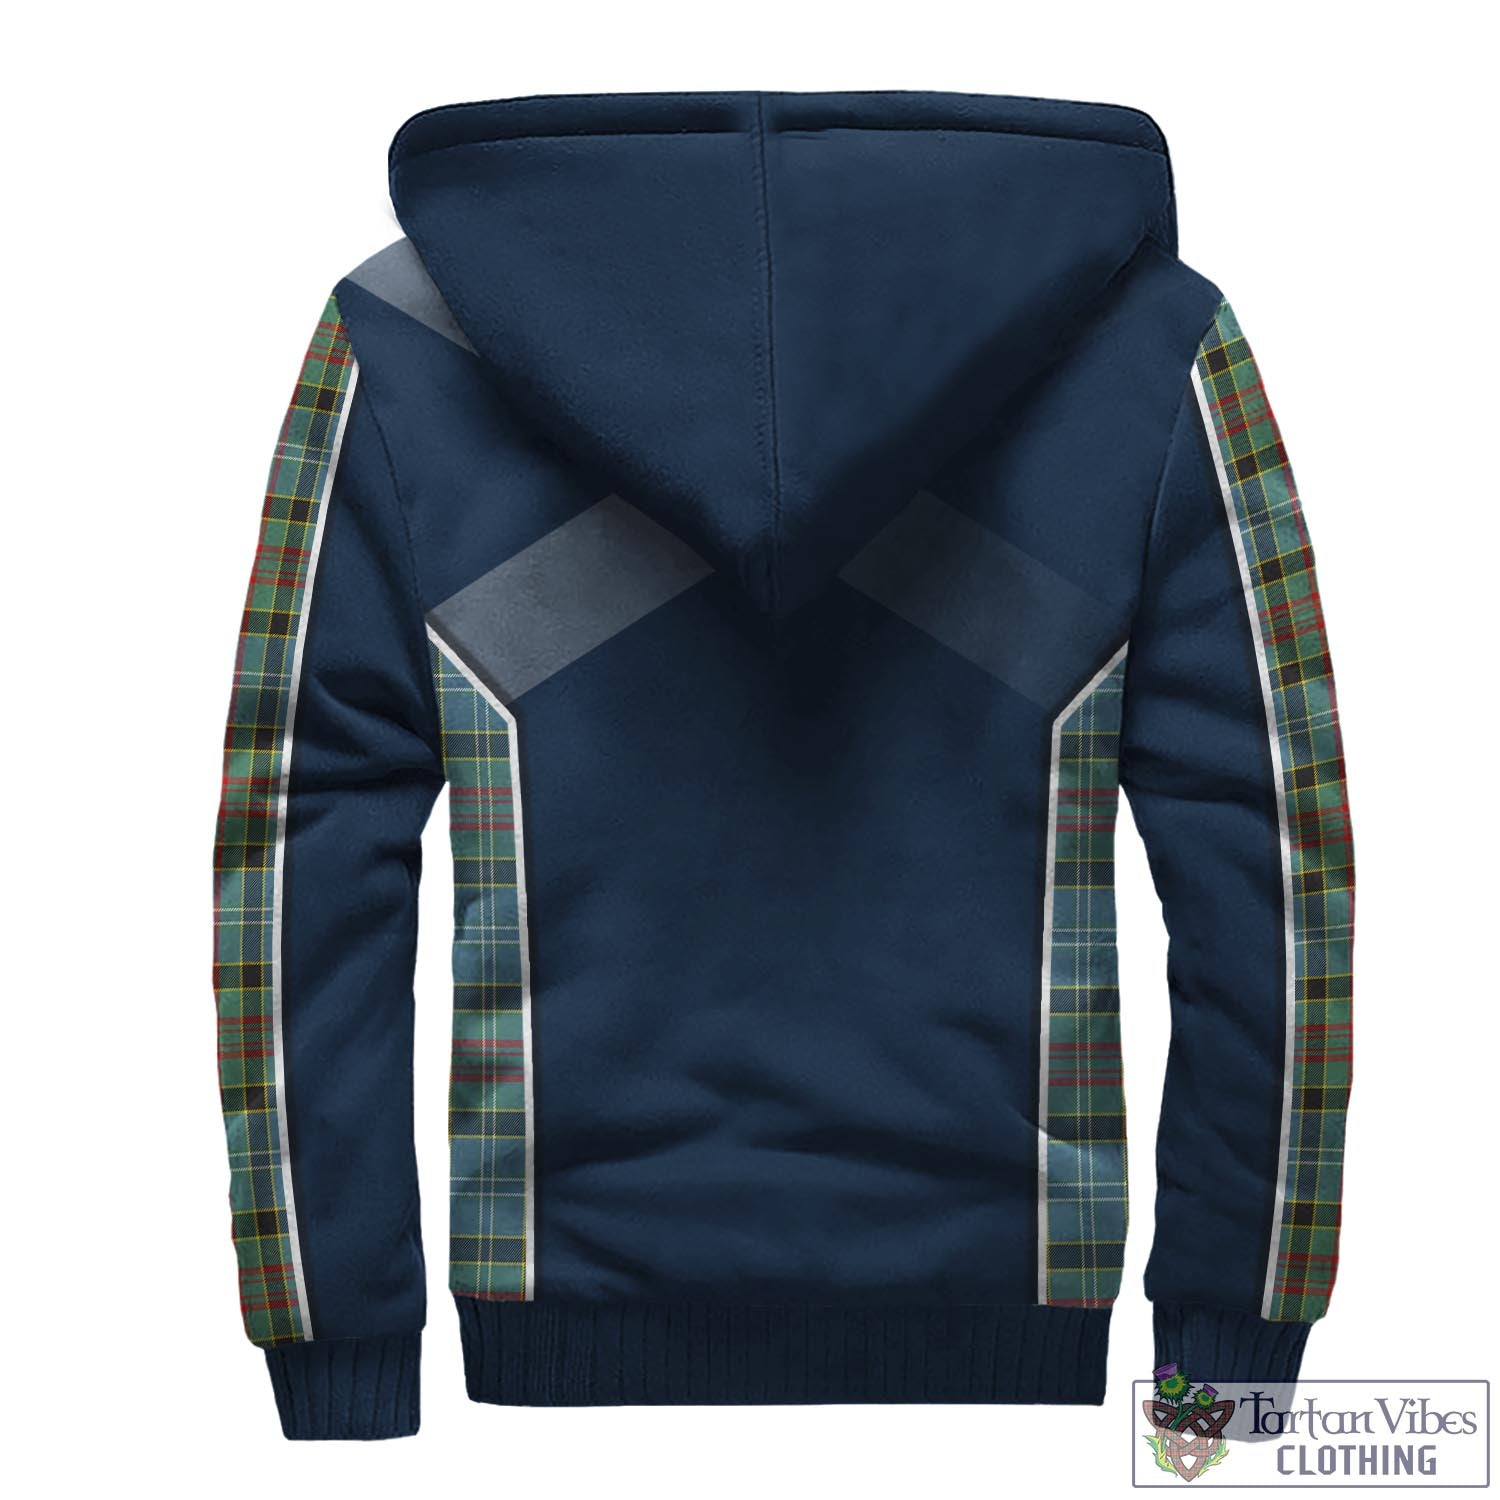 Tartan Vibes Clothing Walkinshaw Tartan Sherpa Hoodie with Family Crest and Scottish Thistle Vibes Sport Style